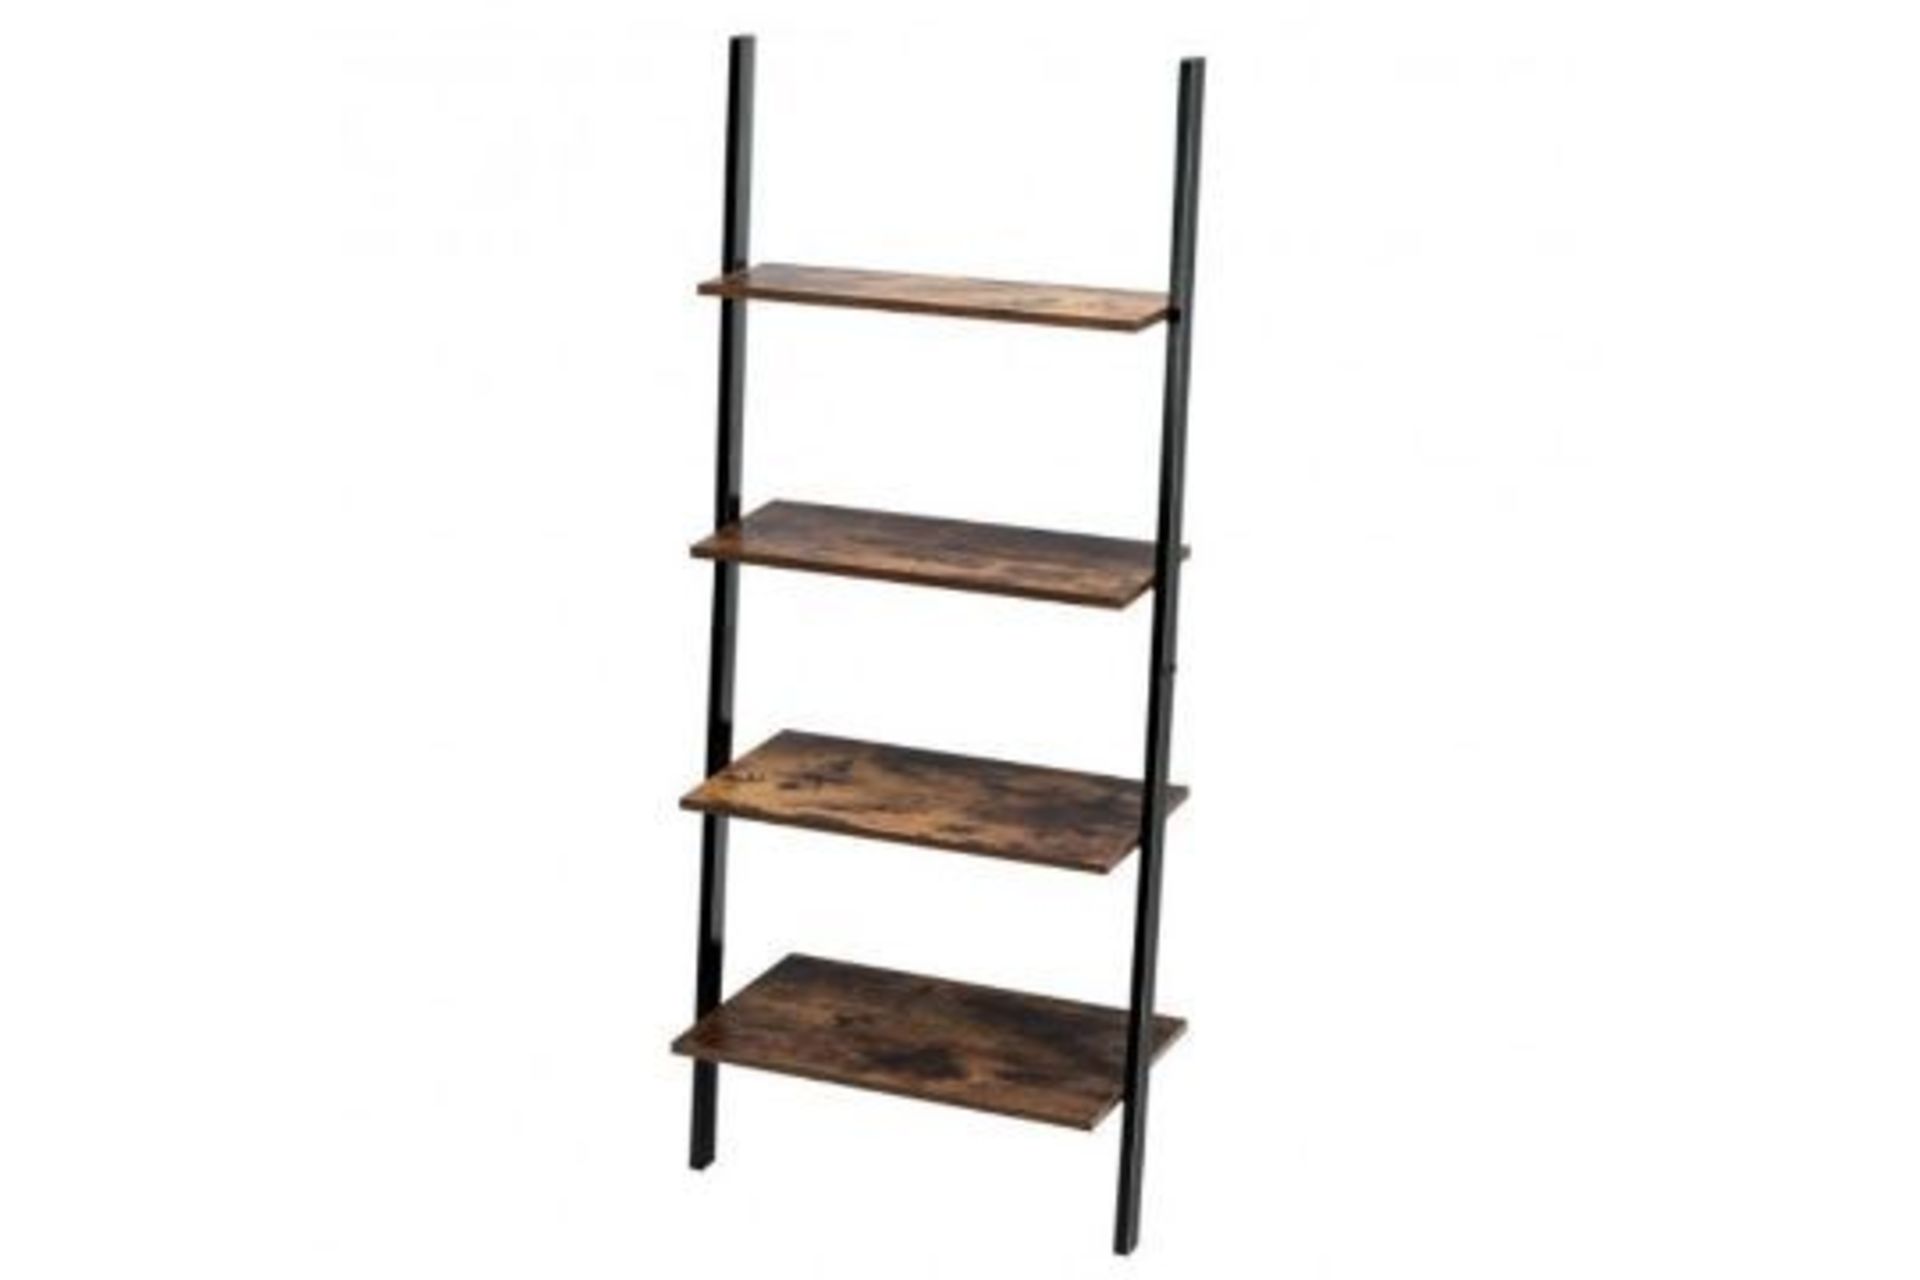 Multipurpose 4-Tier Industrial Leaning Wall Bookcase With Metal Frame. - PW. This 4-tier ladder